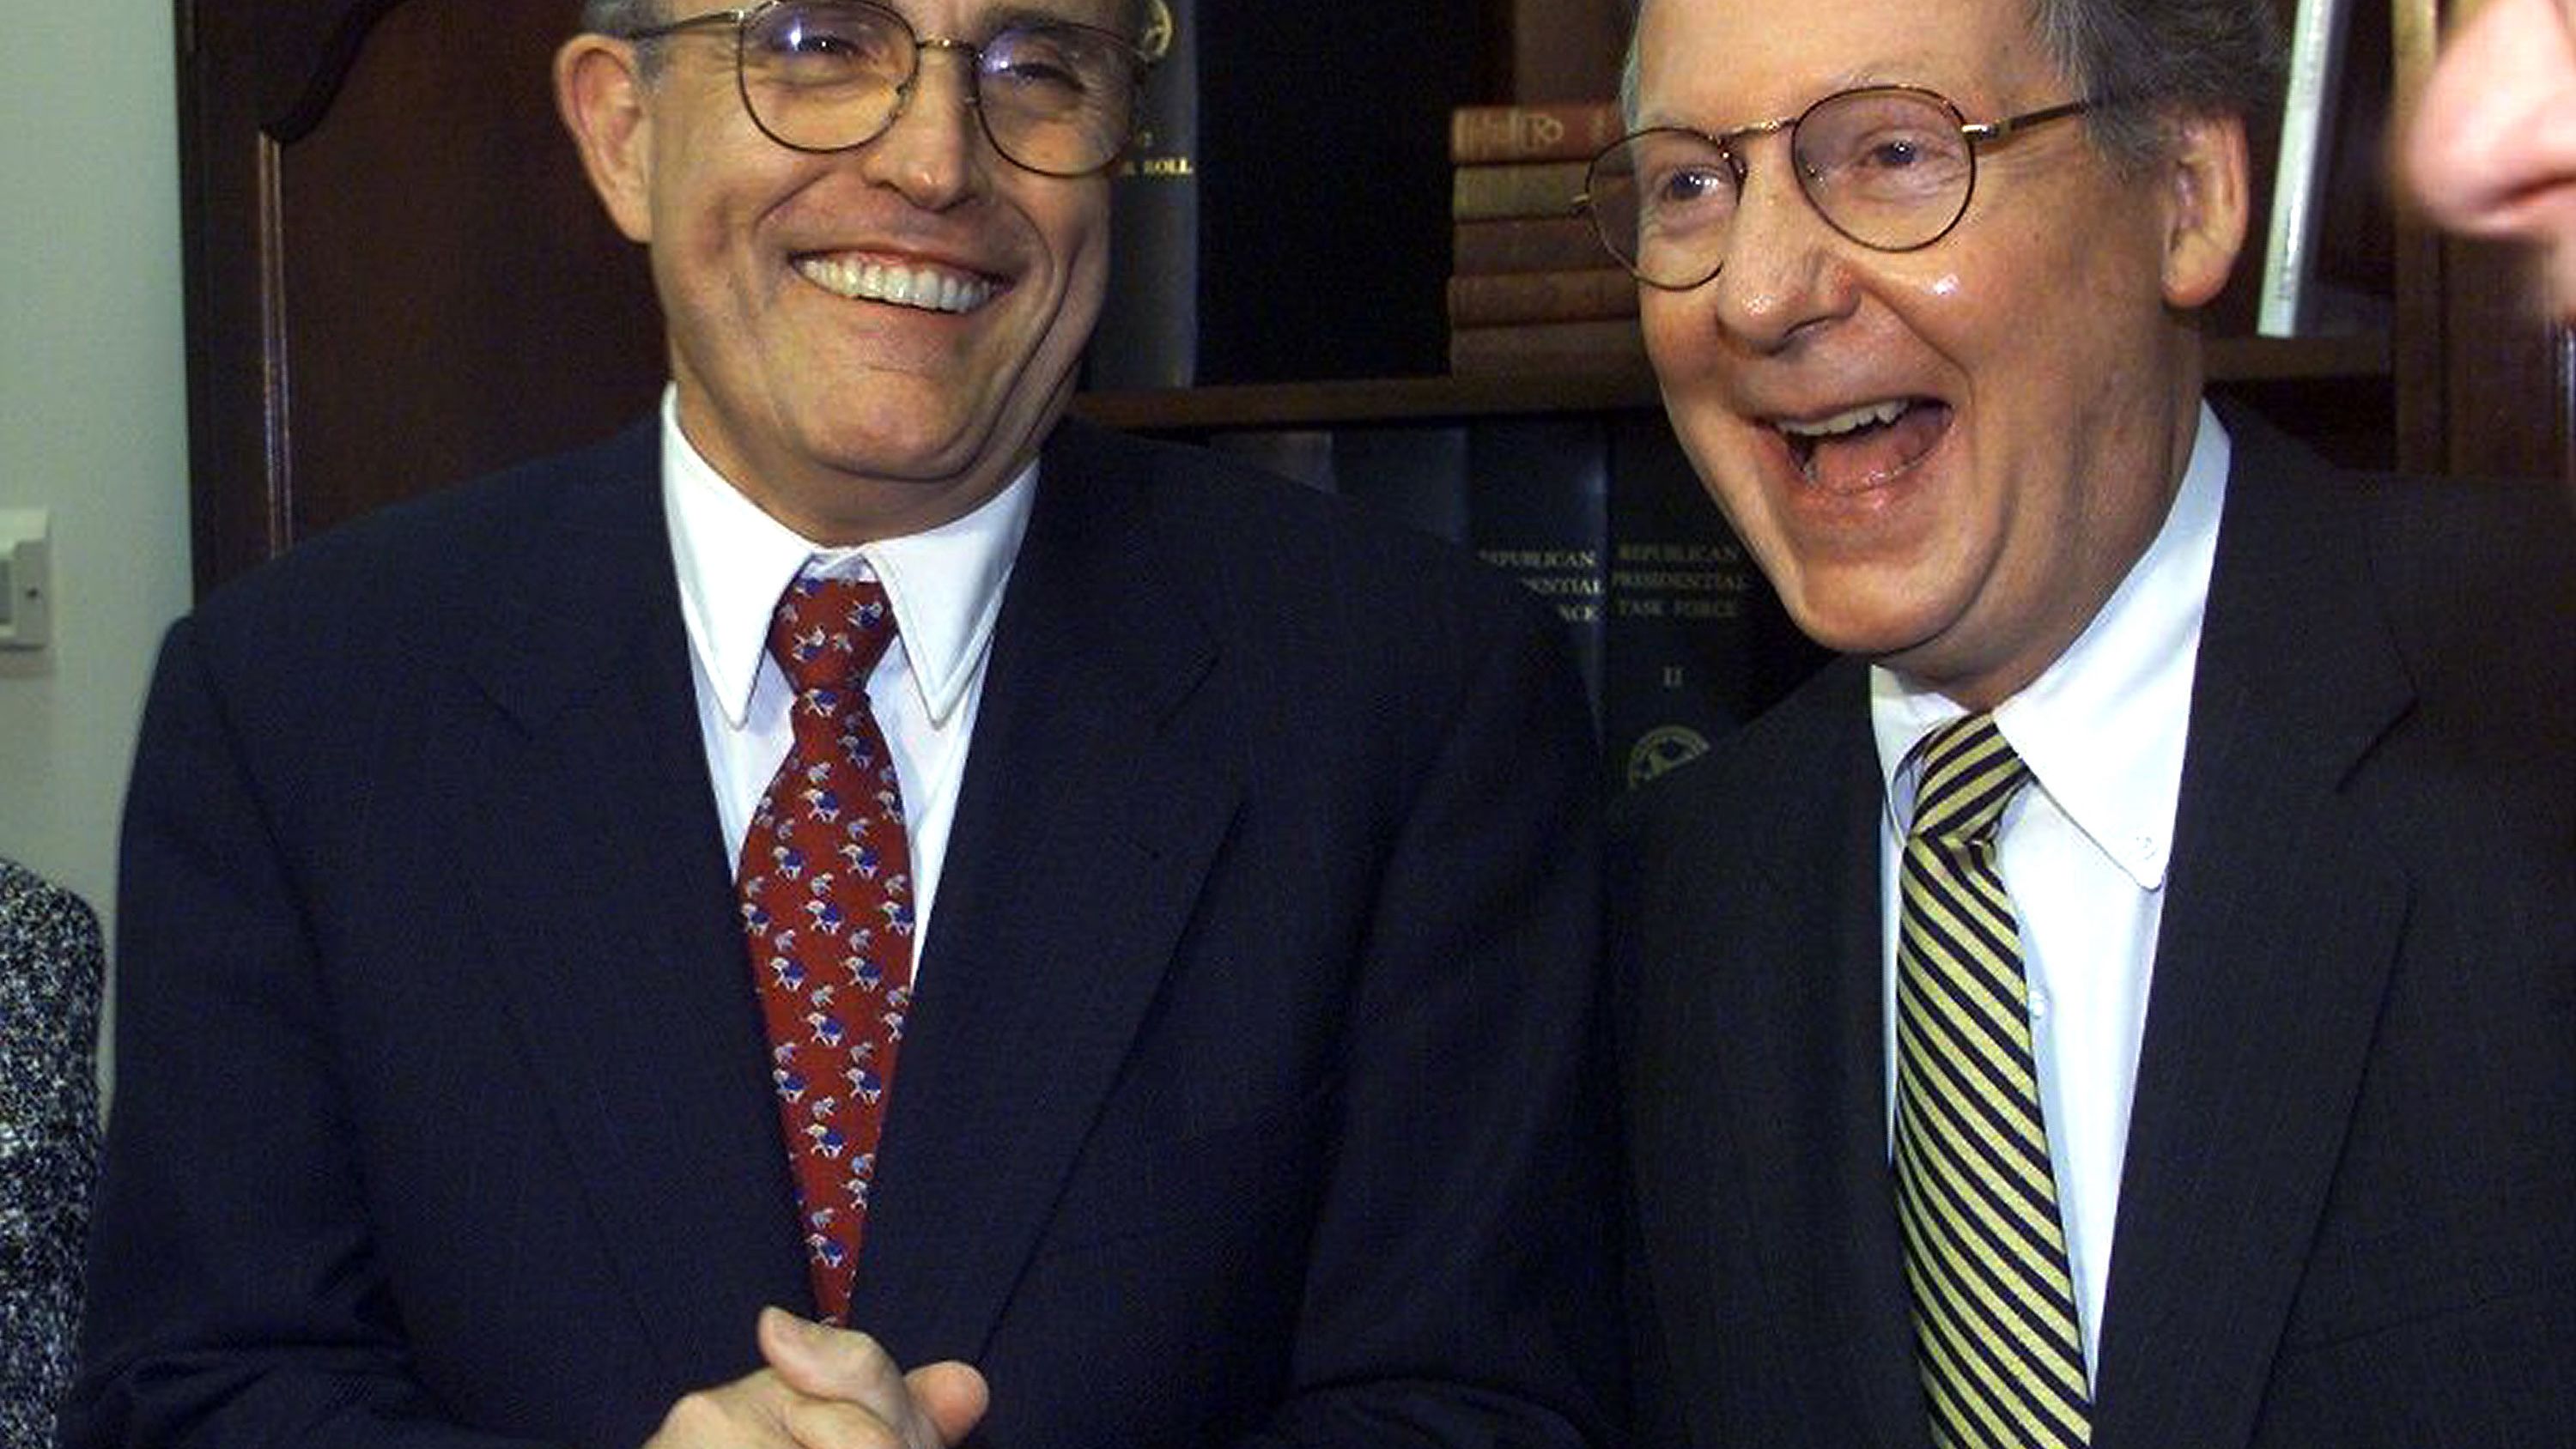 Giuliani shares a laugh with US Sen. Mitch McConnell at a Republican fundraiser in Washington in April 1999.